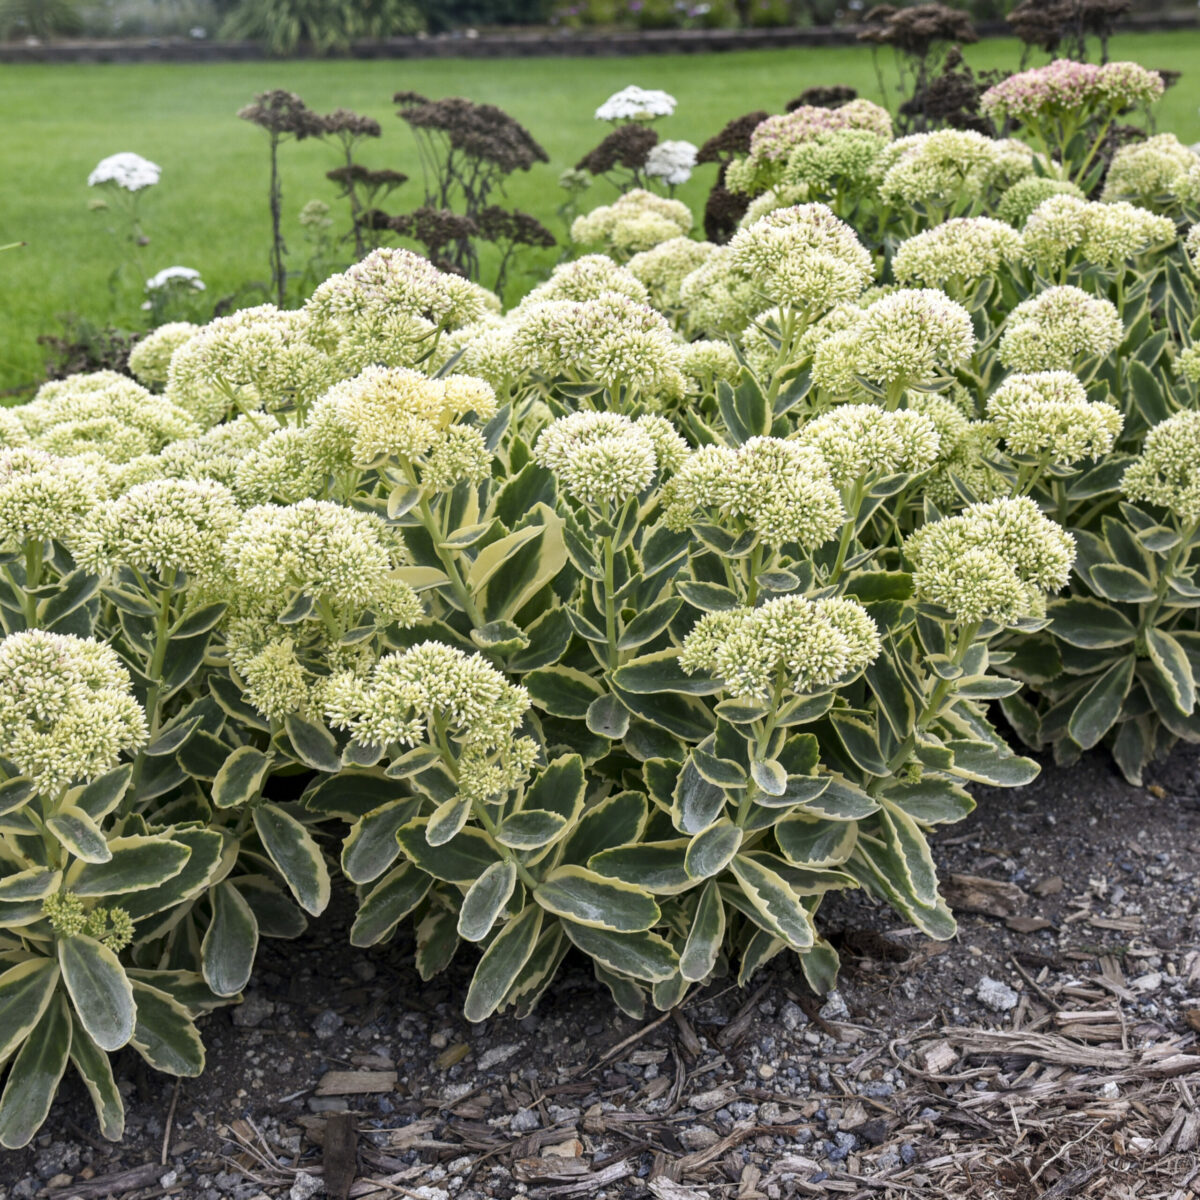 ‘Frosted Fire’ sedum (credit: Walters Gardens, Inc.)